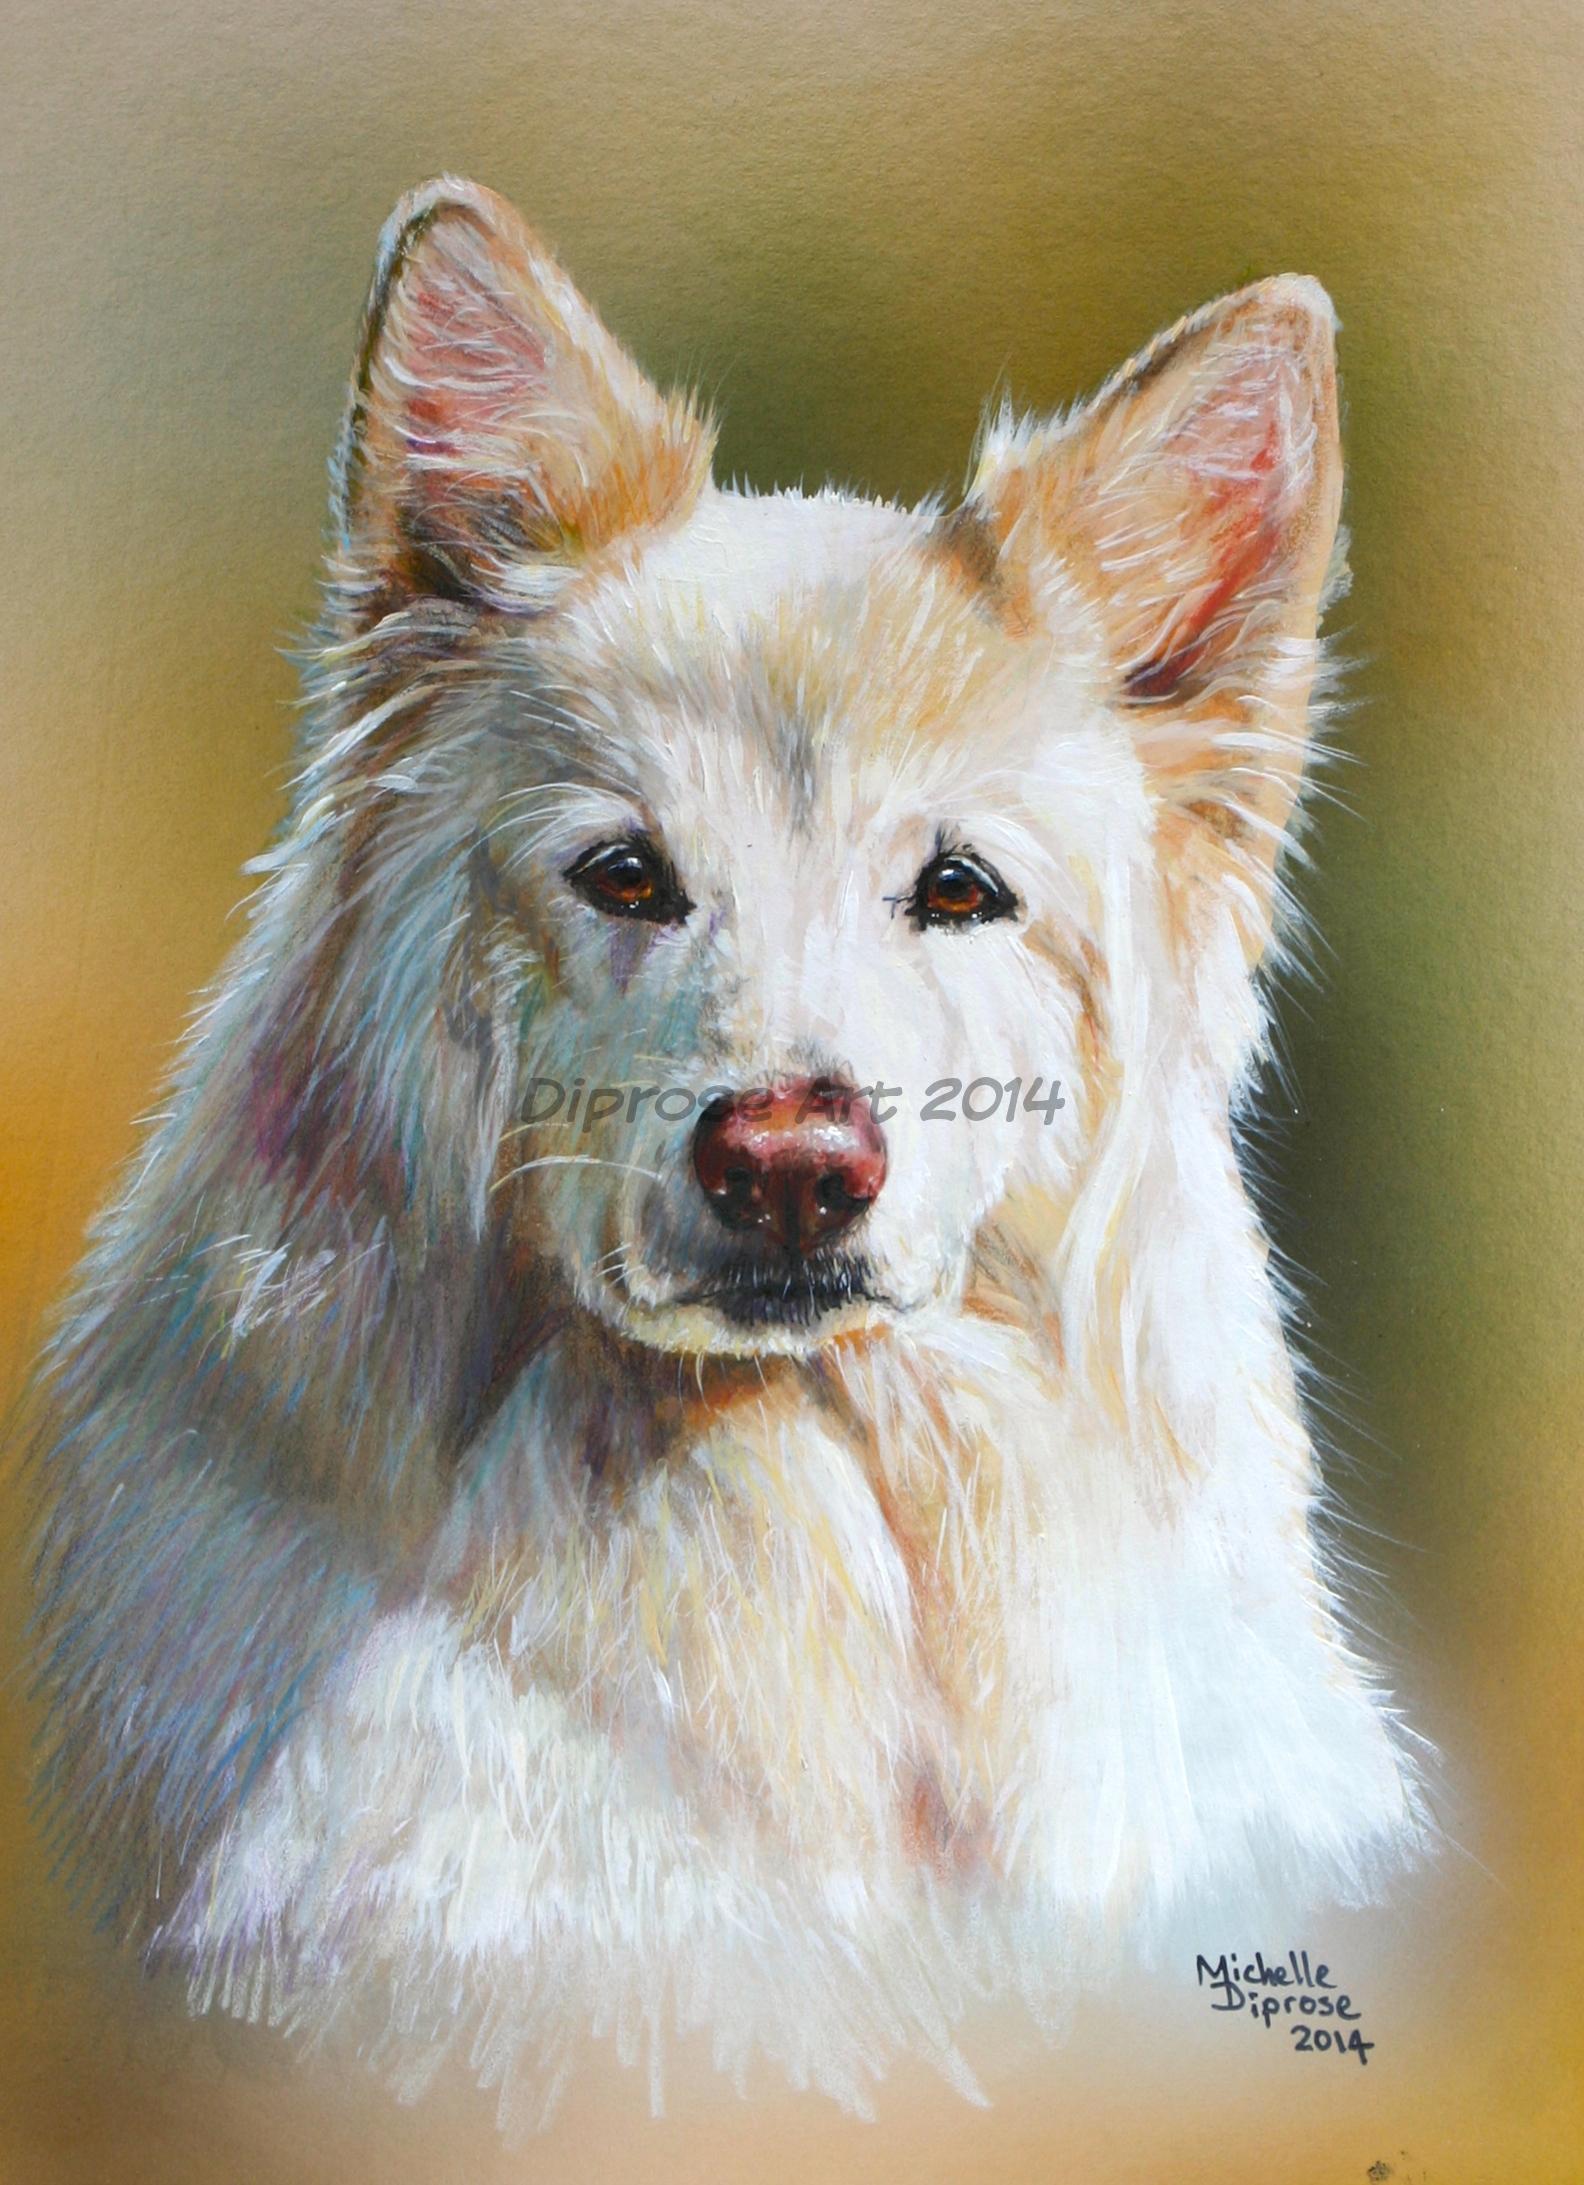 Acrylics on board - approx A4 - pat dog portrait - Nina being a long coated luscious creamy white was a difficult commission but one I really enjoyed doing - it was hot afternoon when I took her photos and she came to life when a bumble bee appeared.